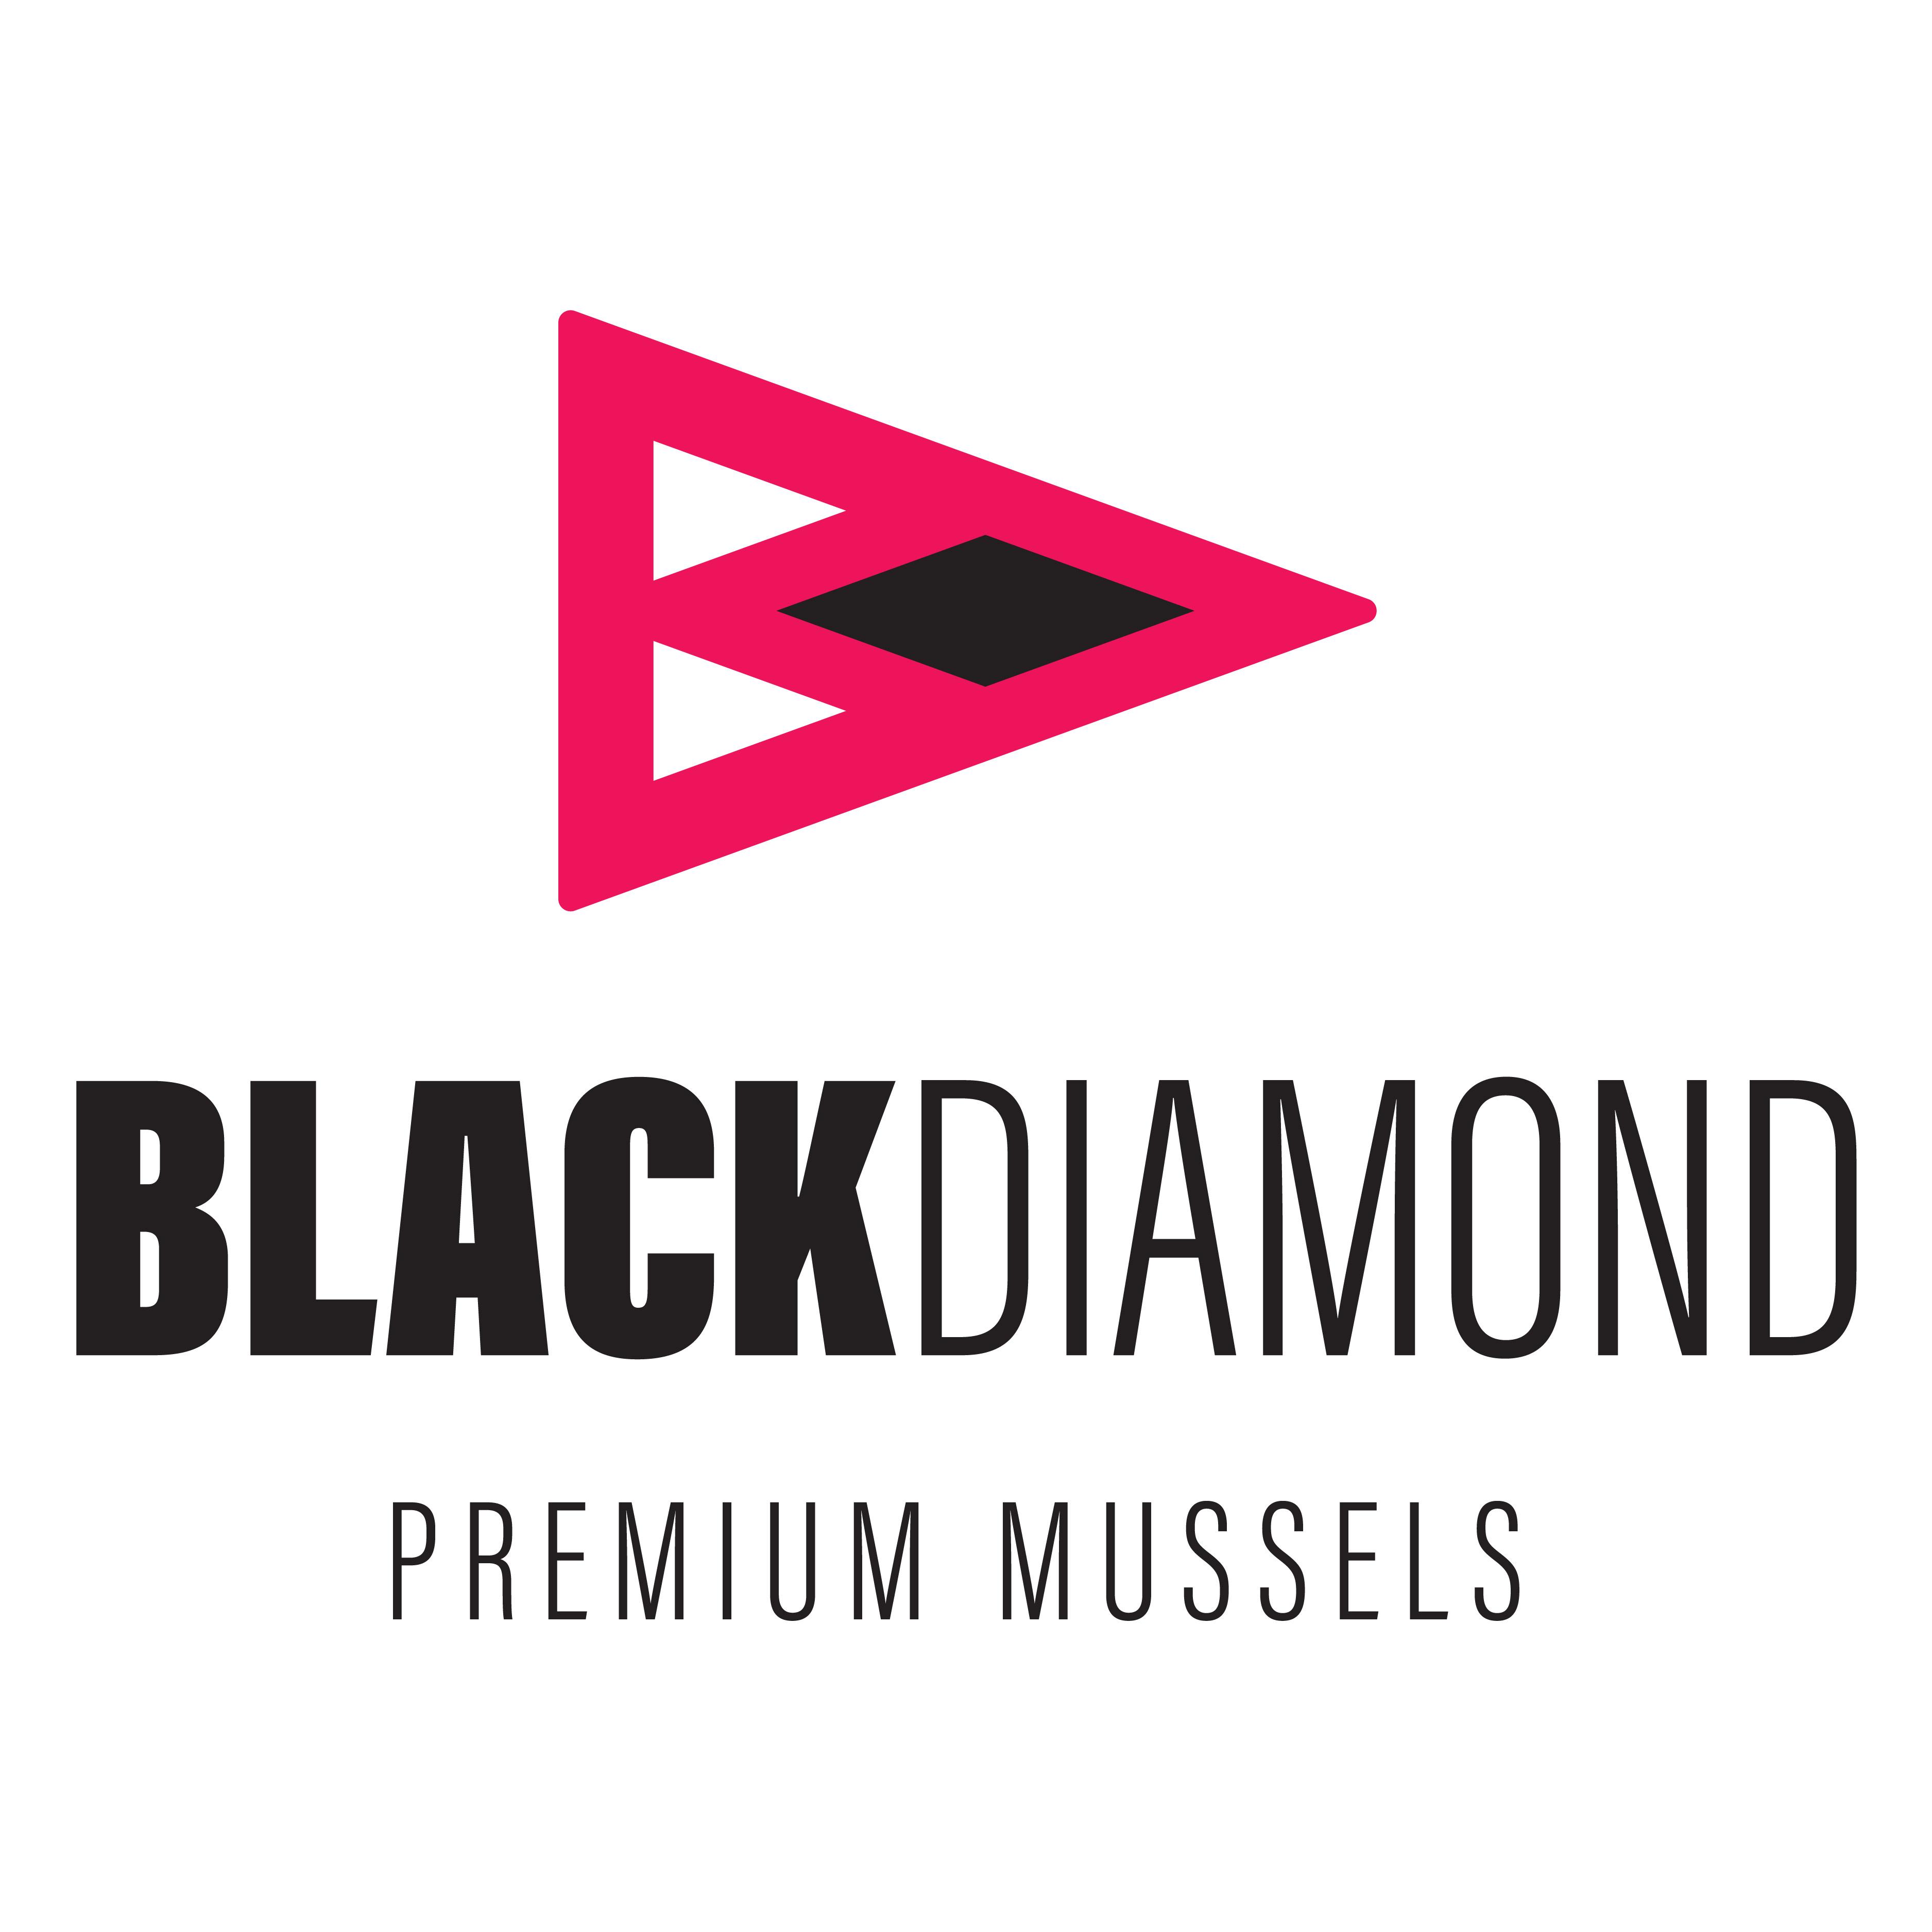 Black Diamond Mussels logo design by logo designer Jason Moss for your inspiration and for the worlds largest logo competition